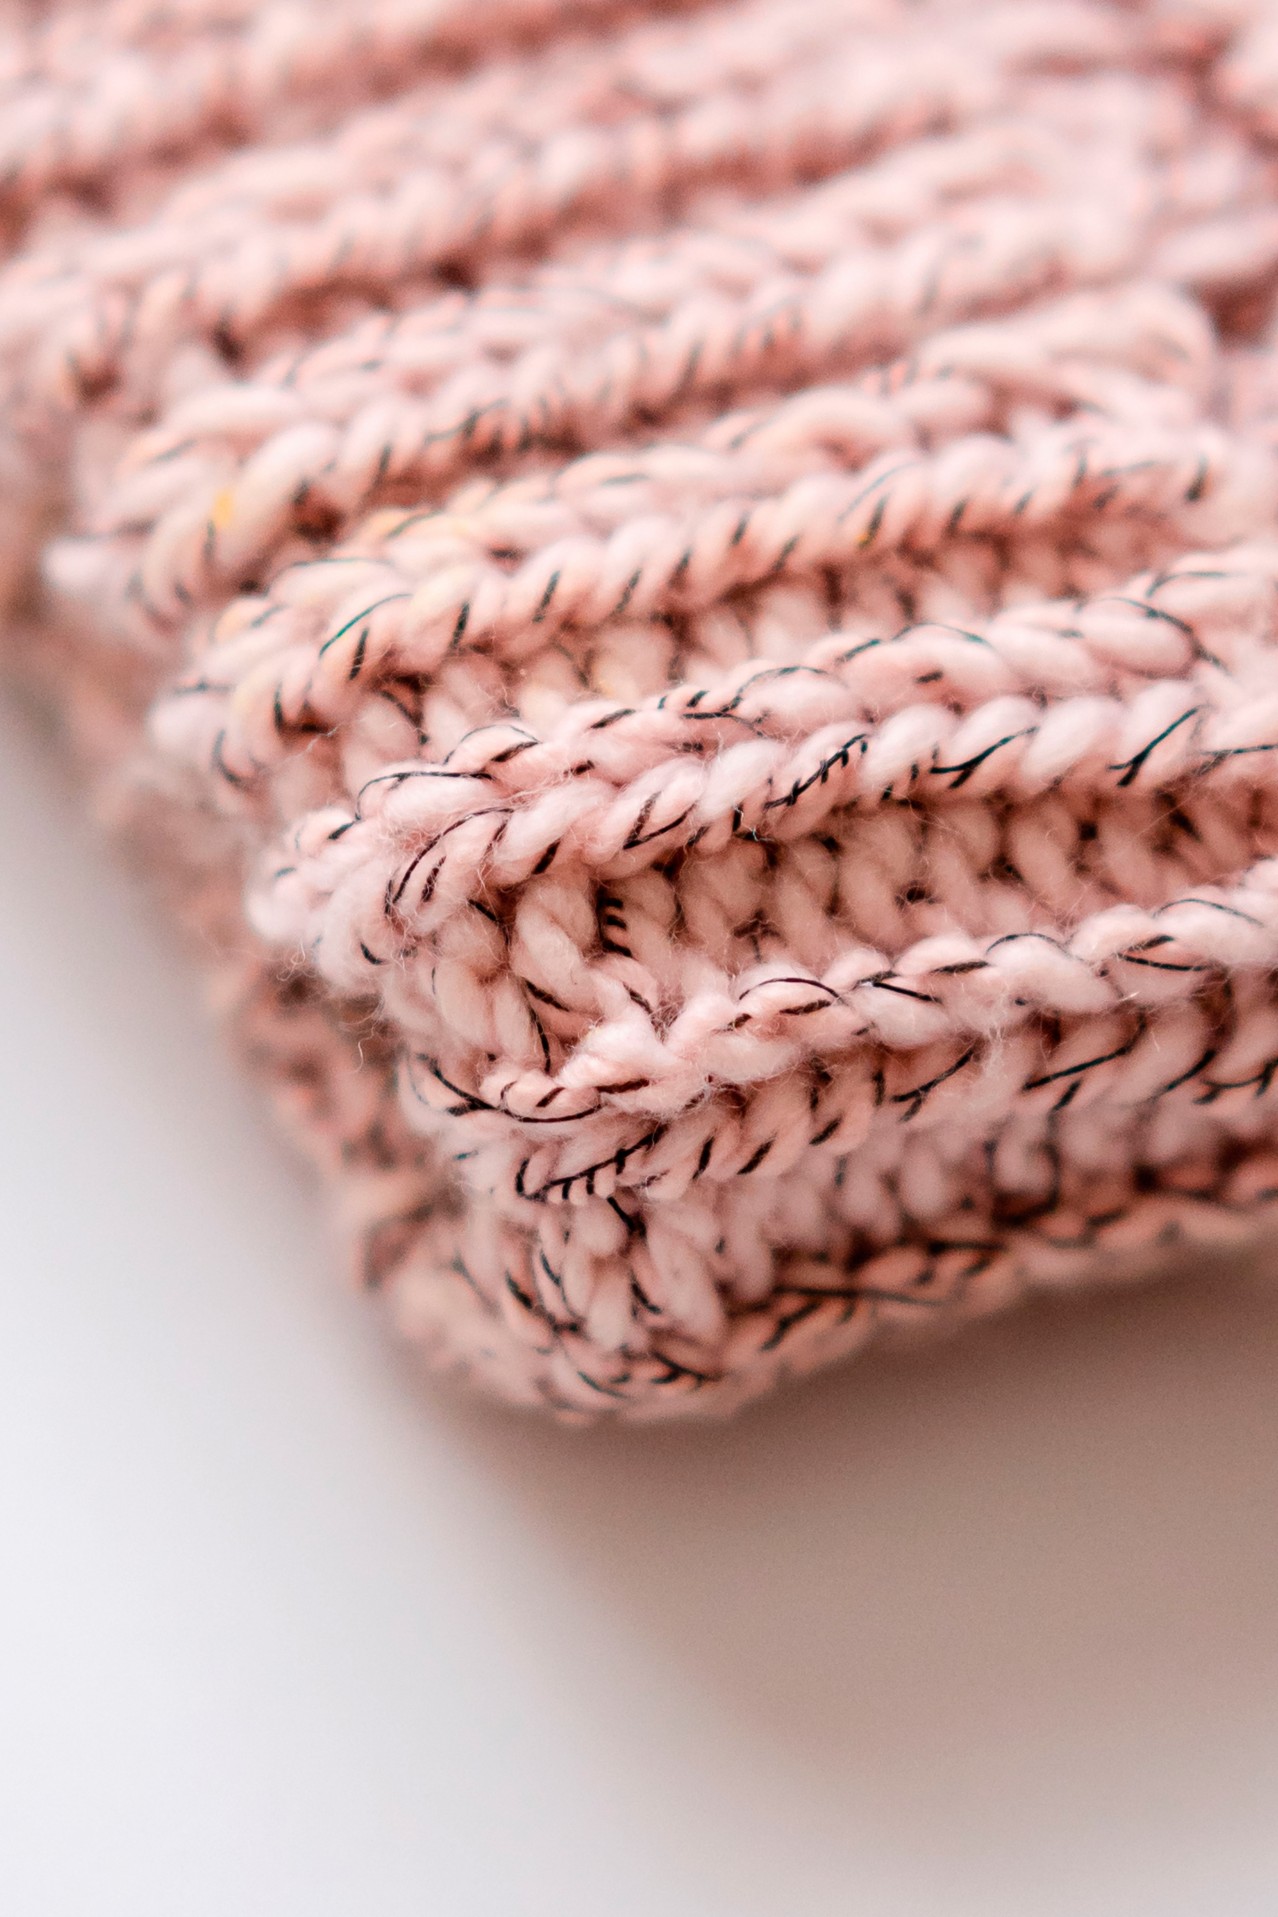 Close-up view of a knitted apparel